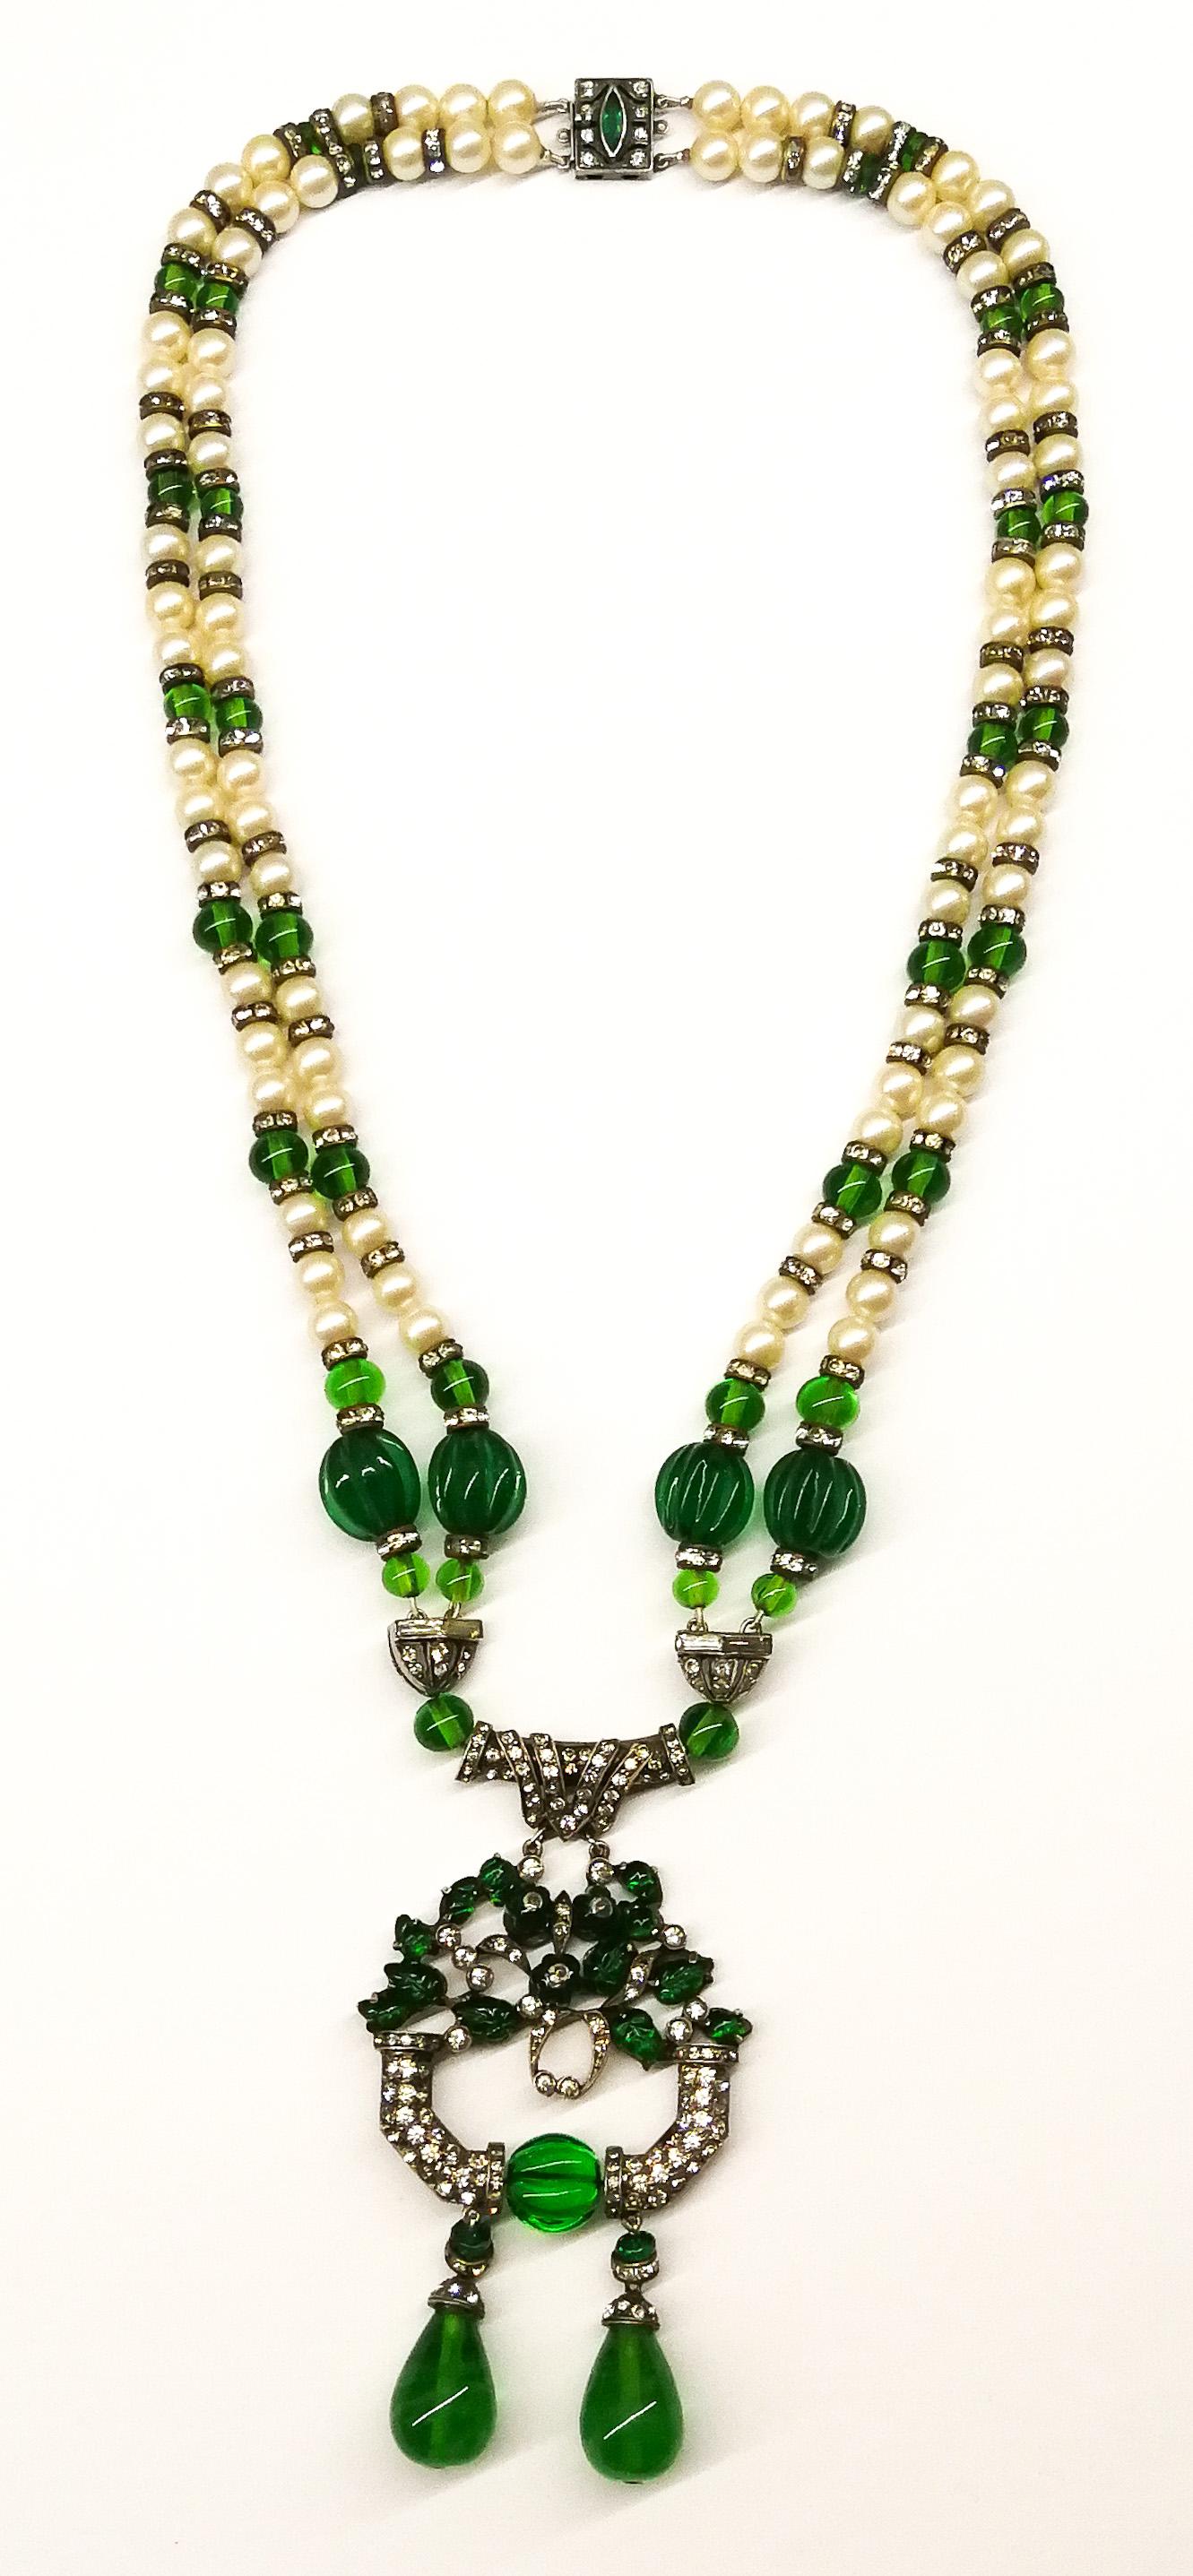 A stunning 1920s Cartier-style sautoir, made from emerald glass, paste pearls and clear pastes, all set in silver, highly typical of the Art Deco period. Both the centrepiece and clasp bear the French hallmark for silver (as shown in two detailed